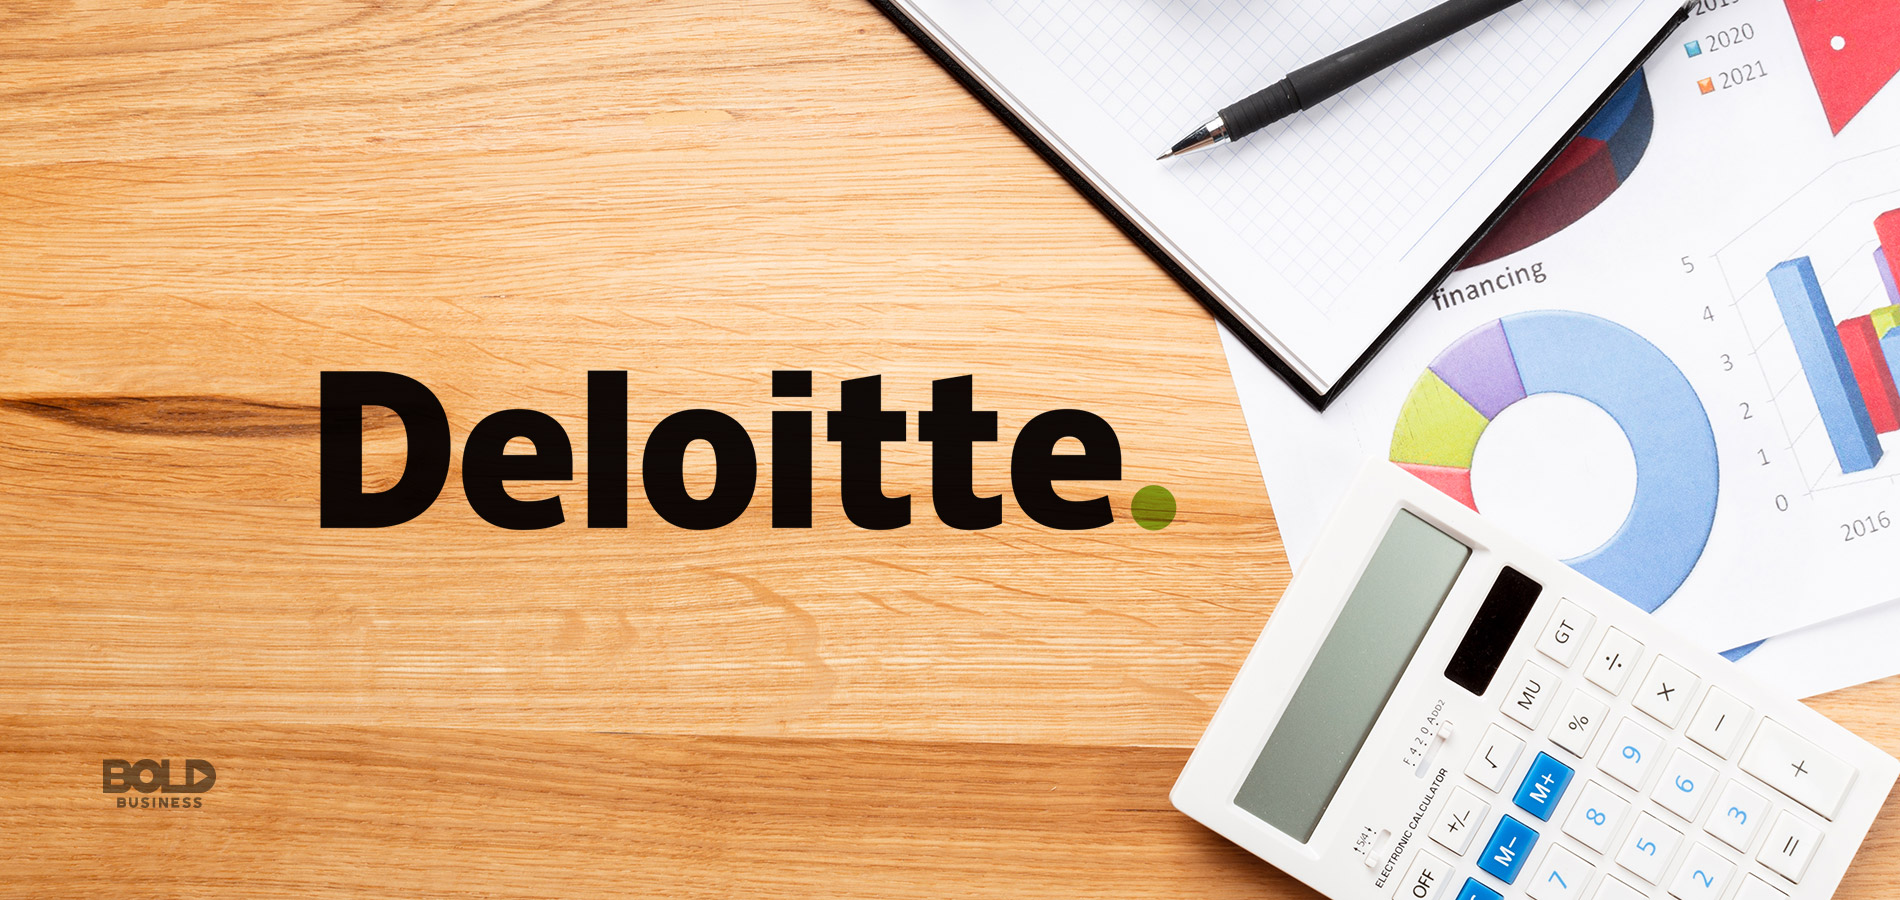 Deloitte is a business with social impact.